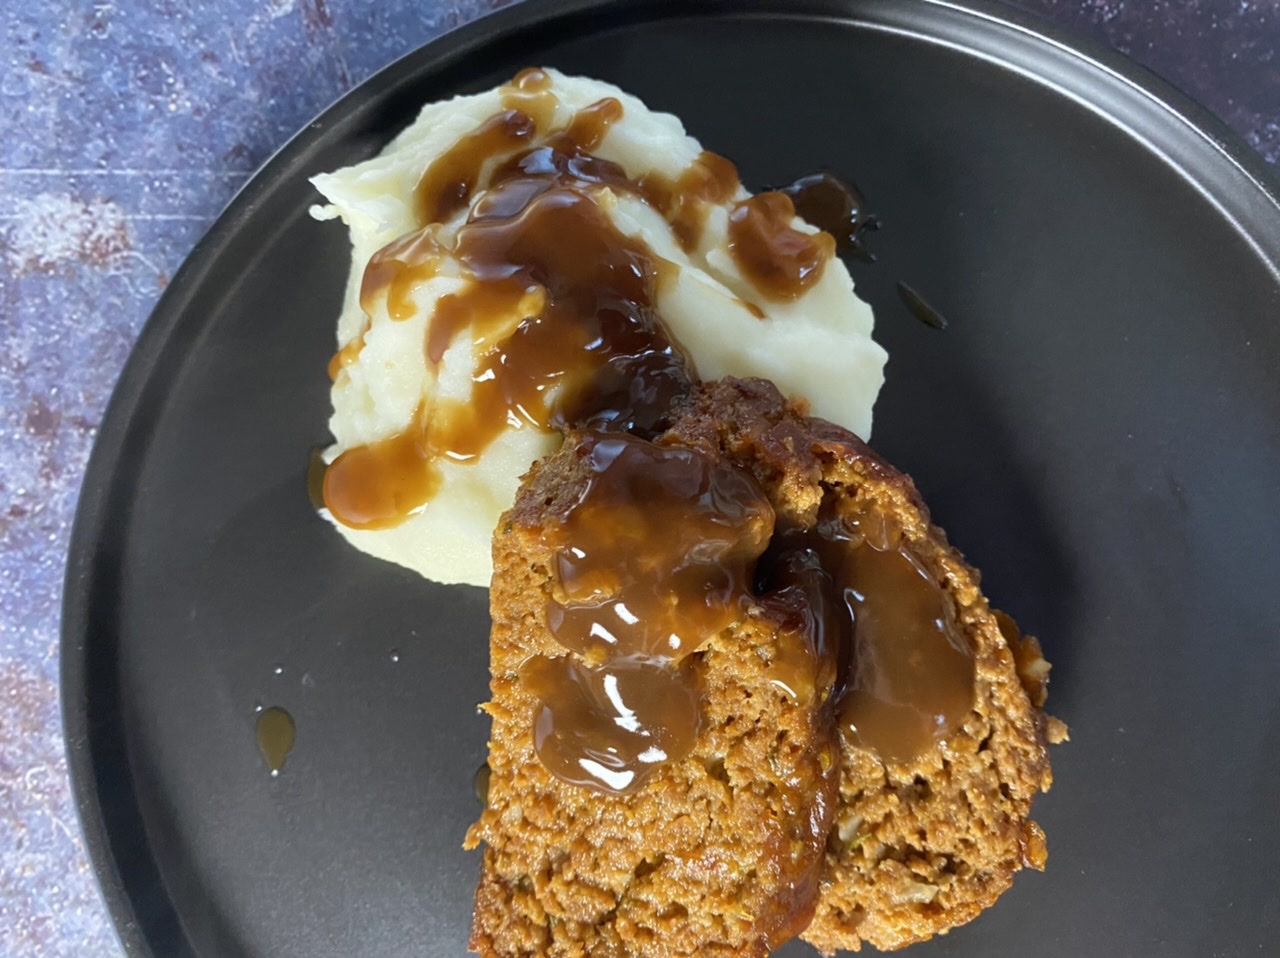 62AB978B BA41 417C 8054 1B3A260221F7 - Grown-up Meatloaf with a Savory Whiskey Glaze